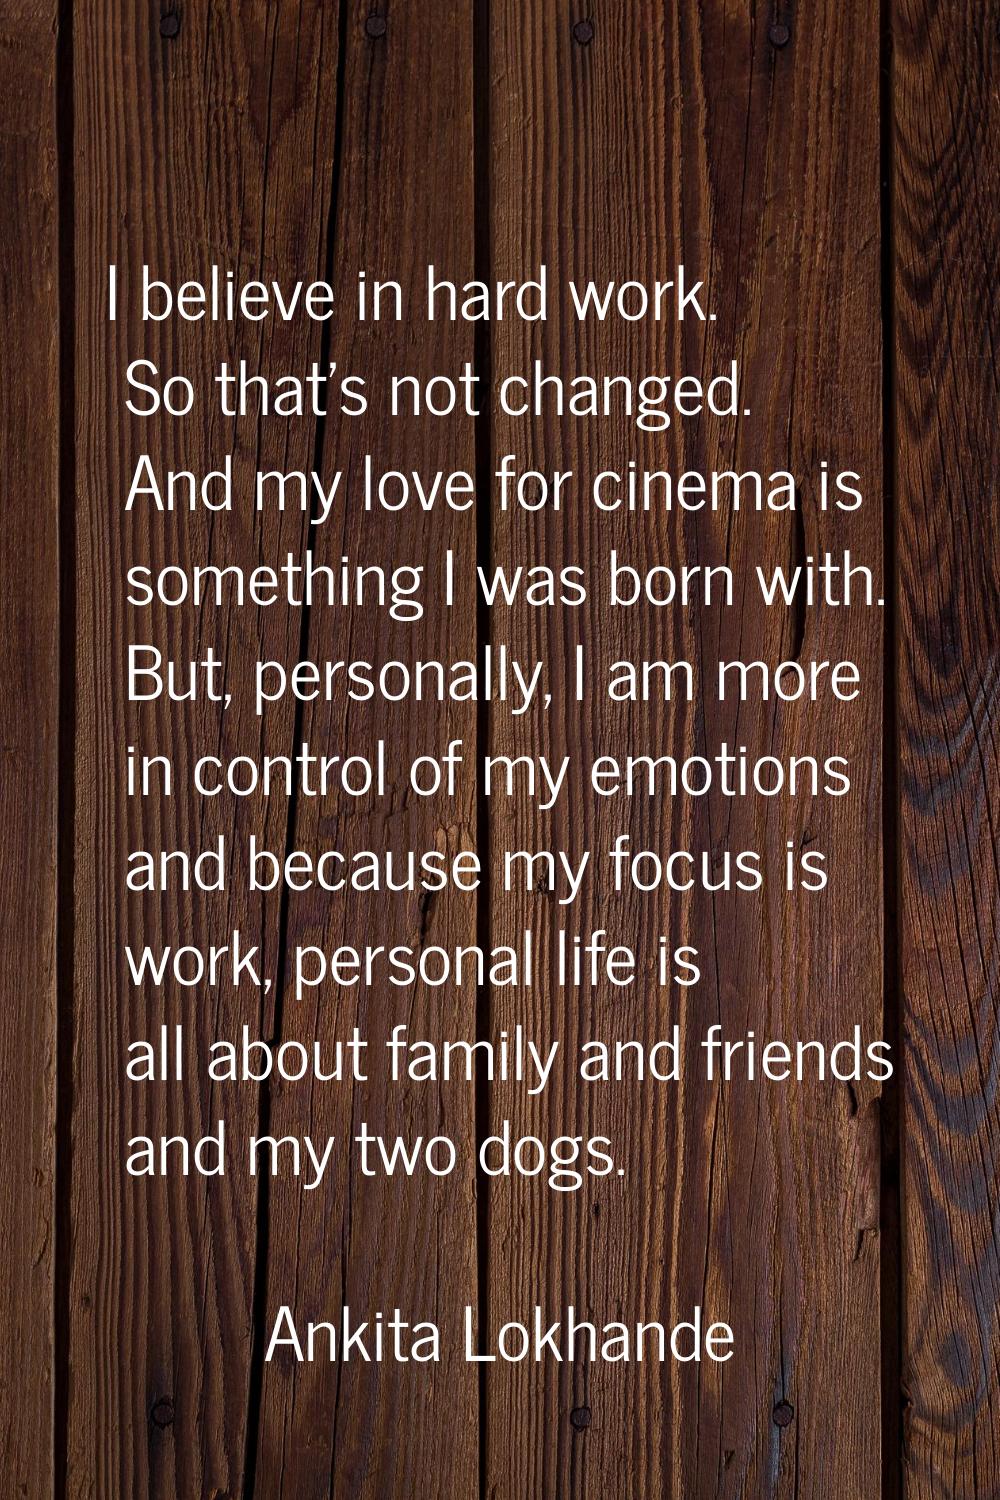 I believe in hard work. So that's not changed. And my love for cinema is something I was born with.